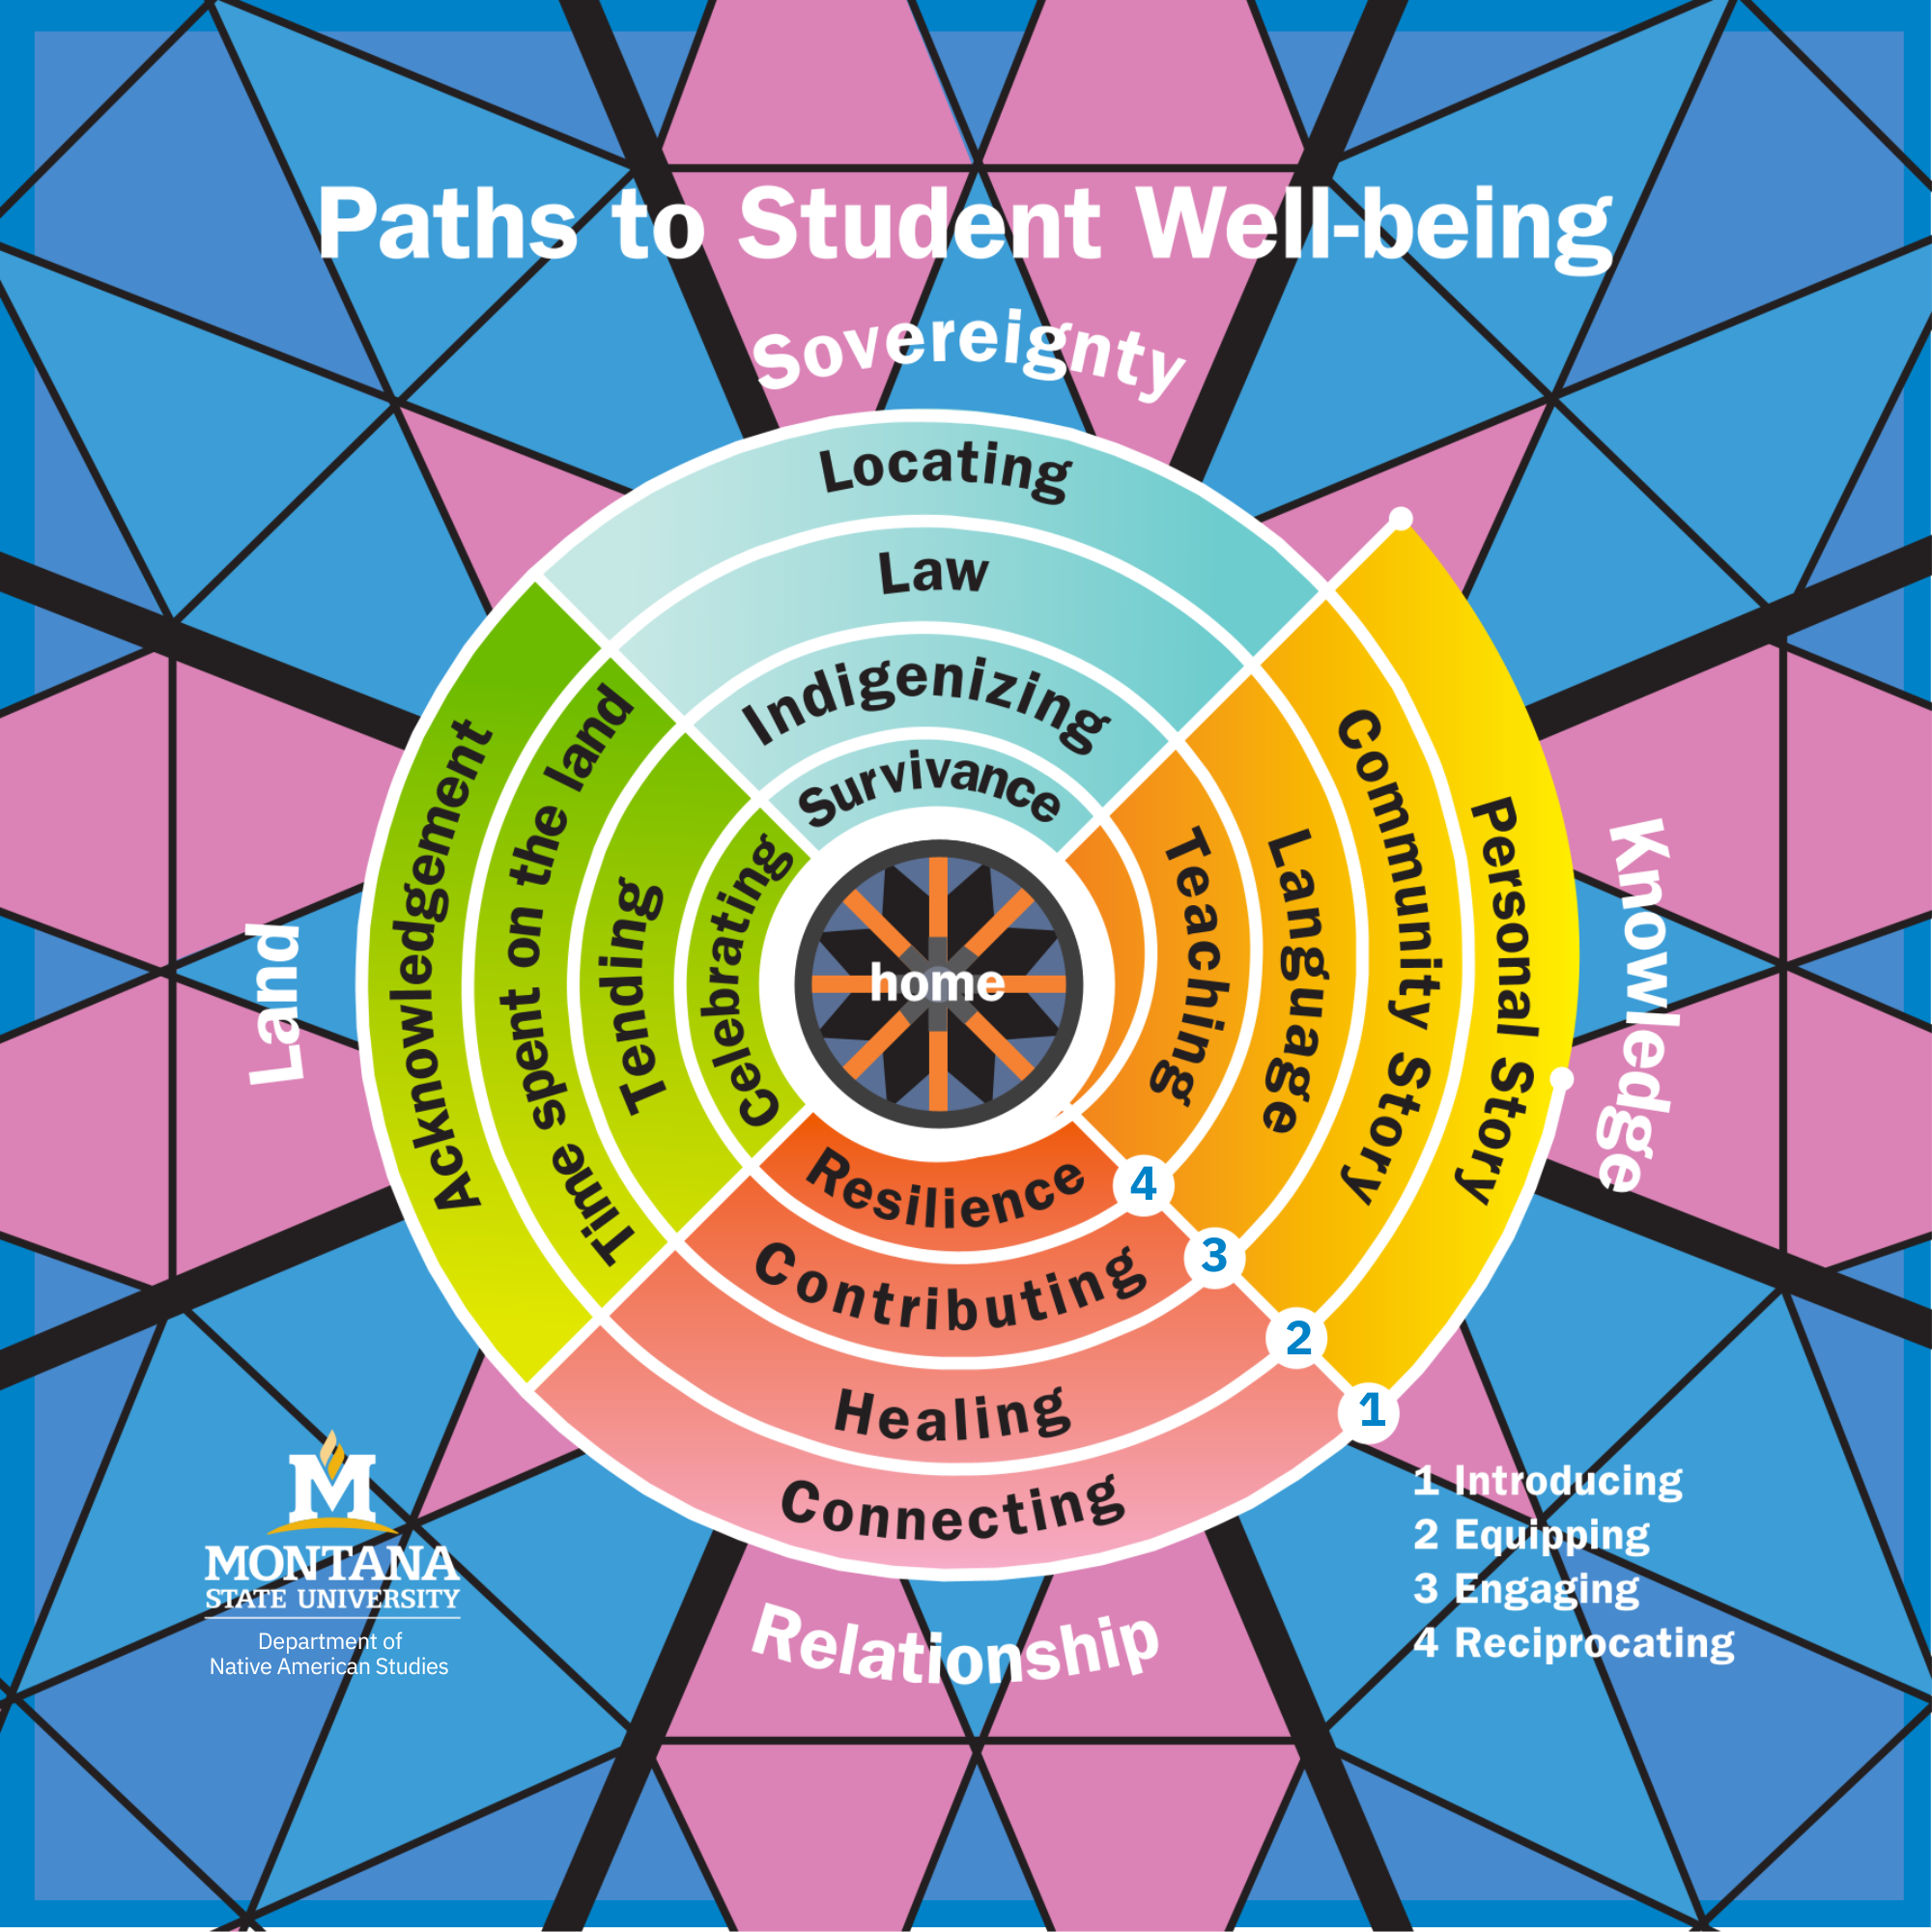 Student Well-Being Model